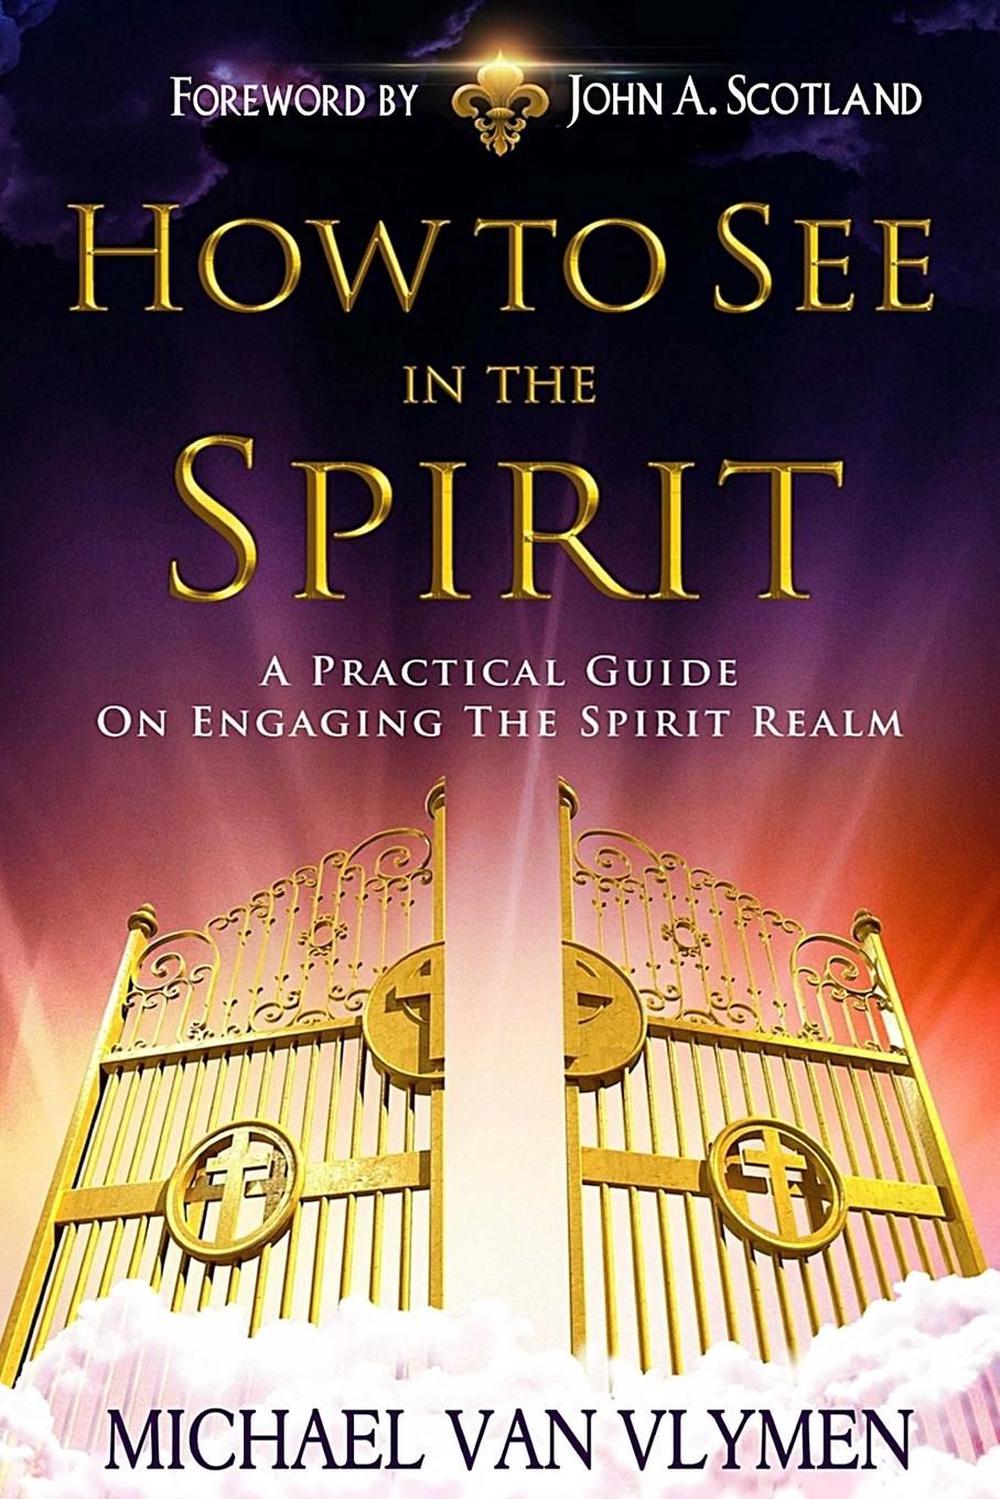 How To See In The Spirit Realm Pdf